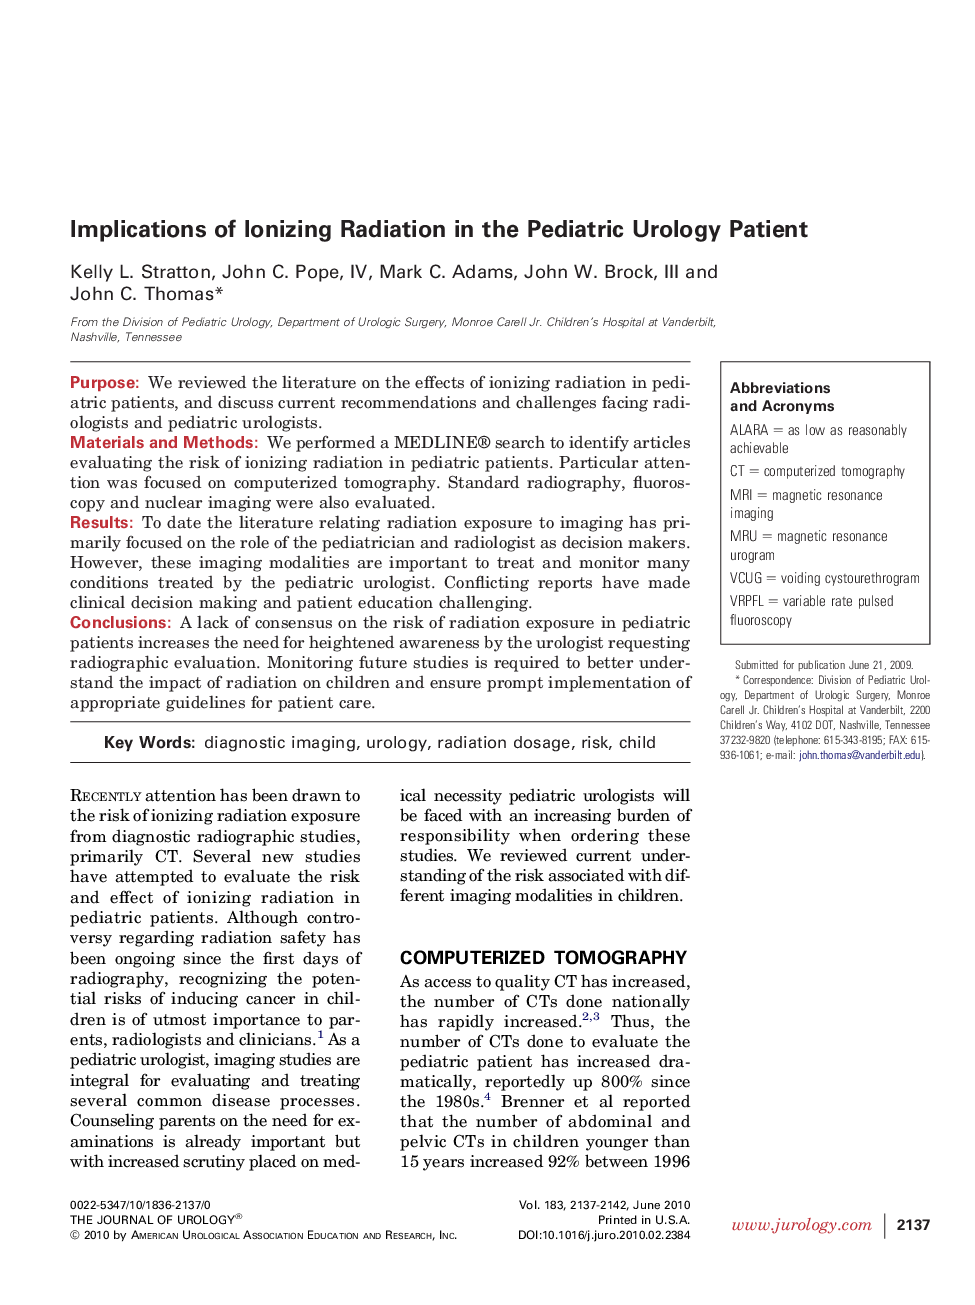 Implications of Ionizing Radiation in the Pediatric Urology Patient